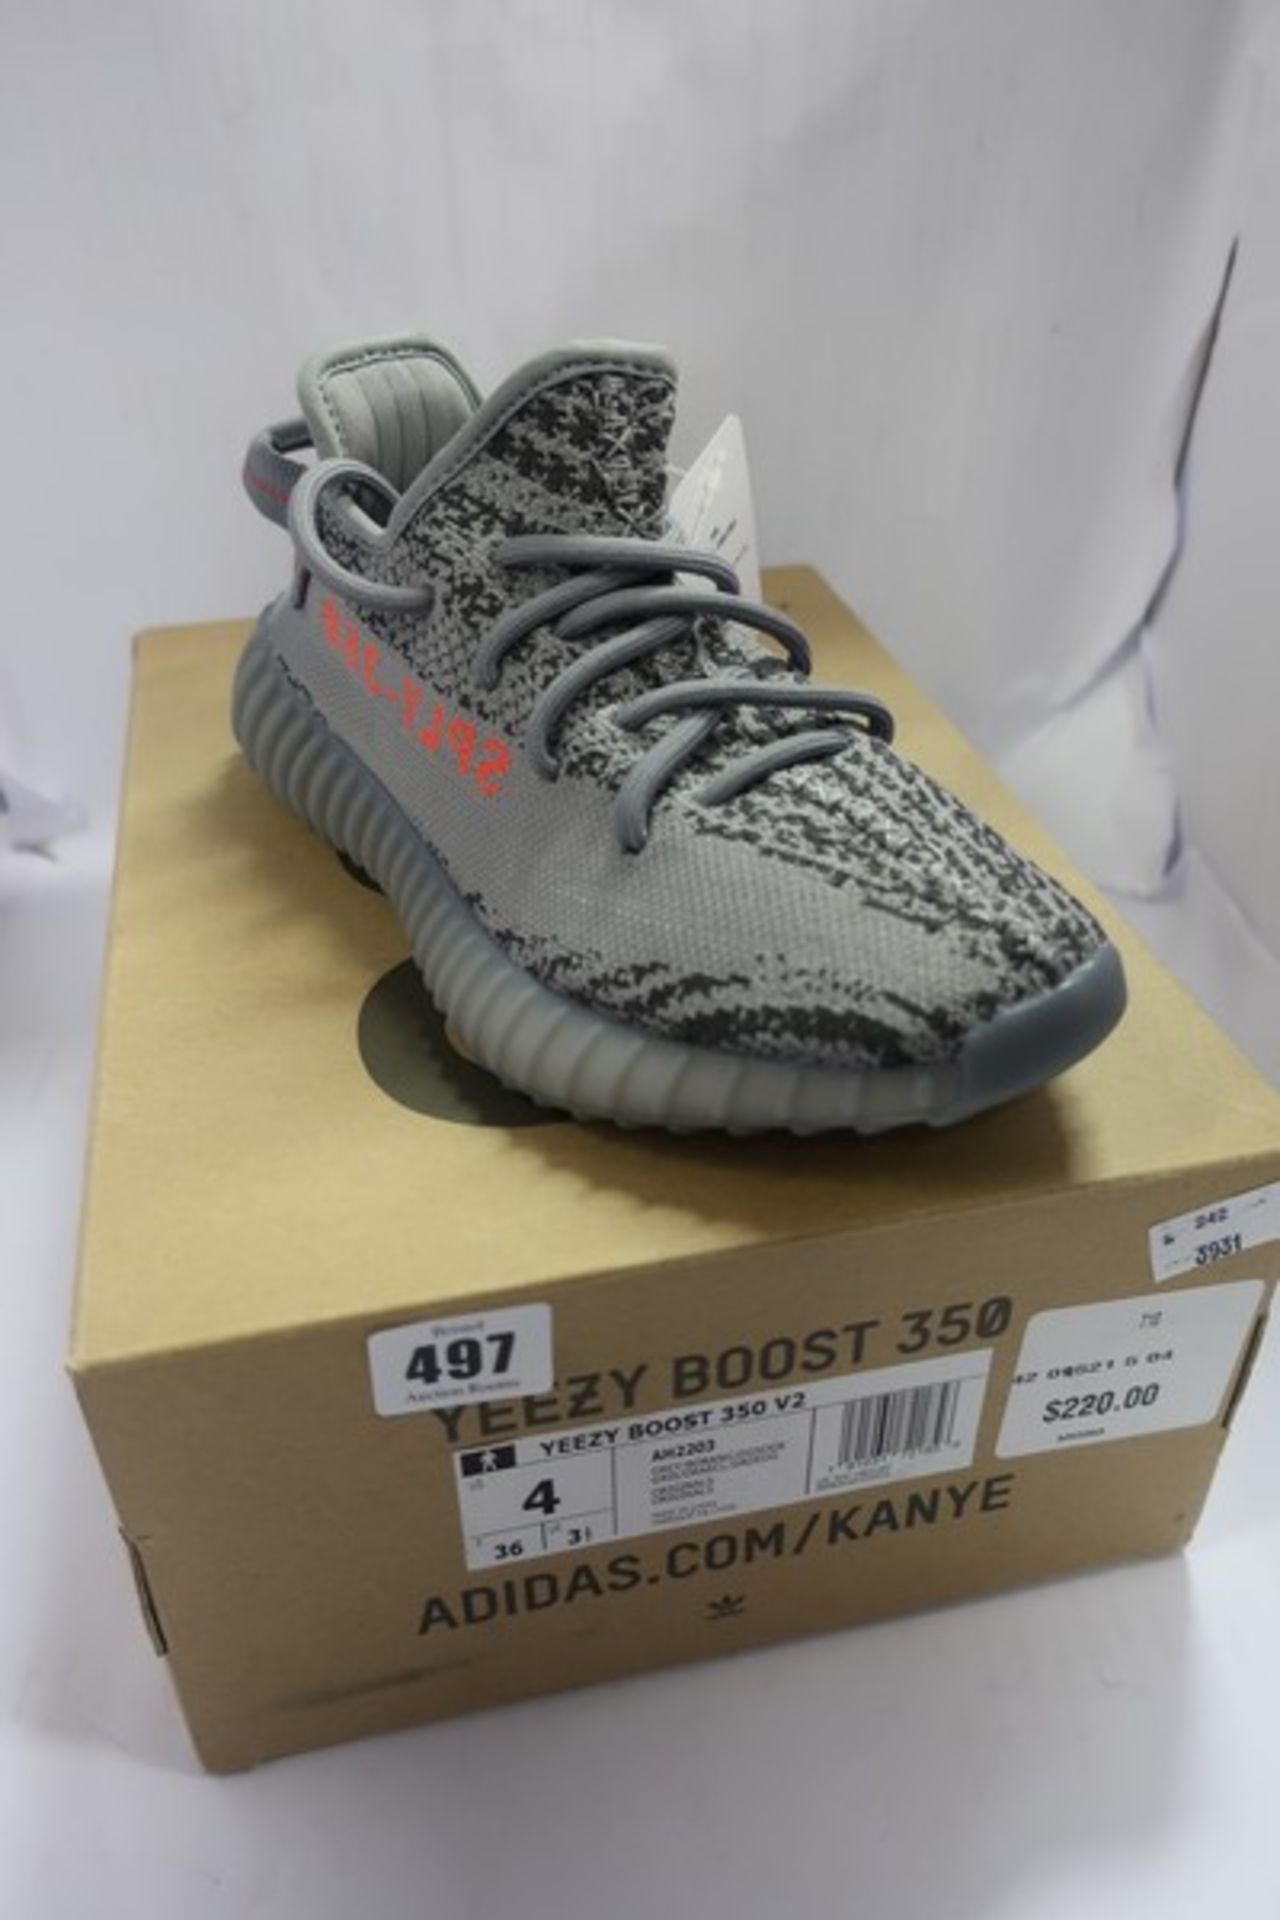 A pair of as new Adidas Yeezy Boost 350 V2 trainers (UK 3.5).